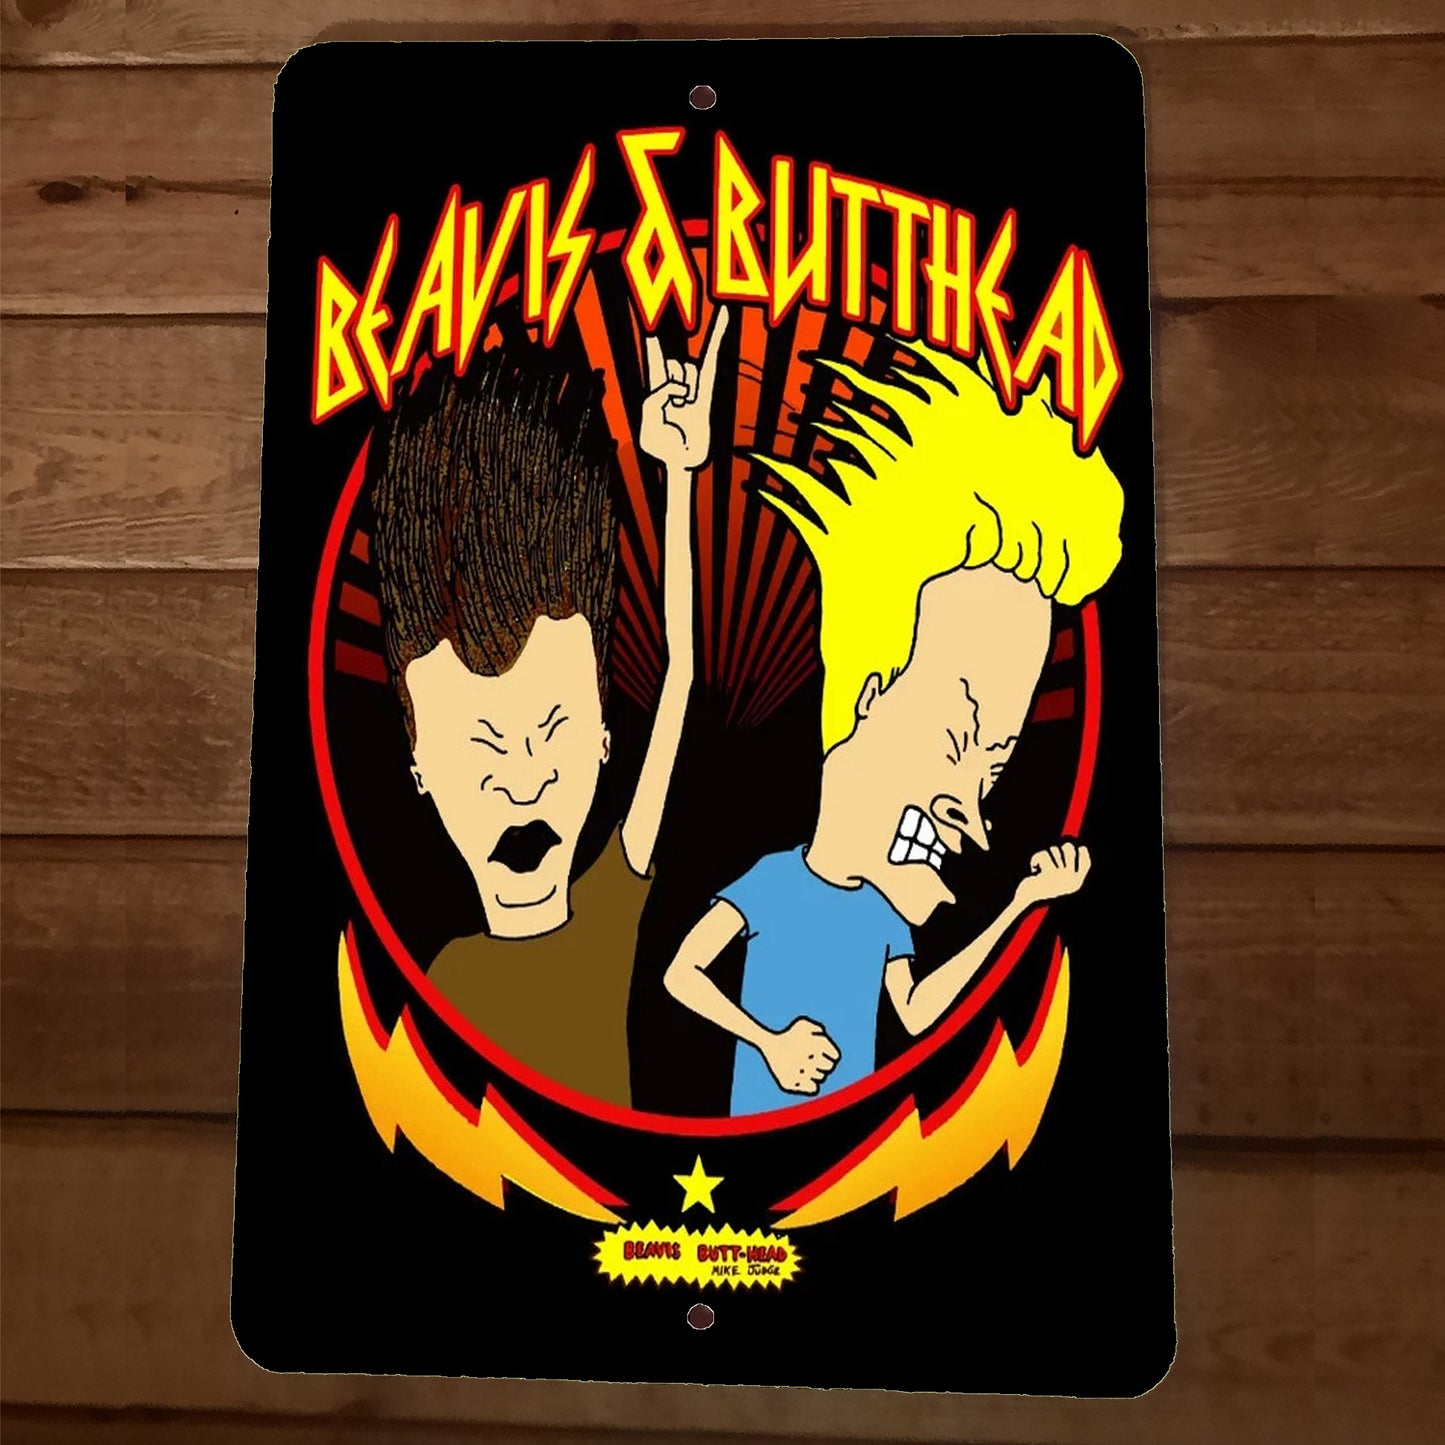 Bundle of Butts 5 Beavis and Butthead 8x12 Metal Walls Signs and Mouse pad